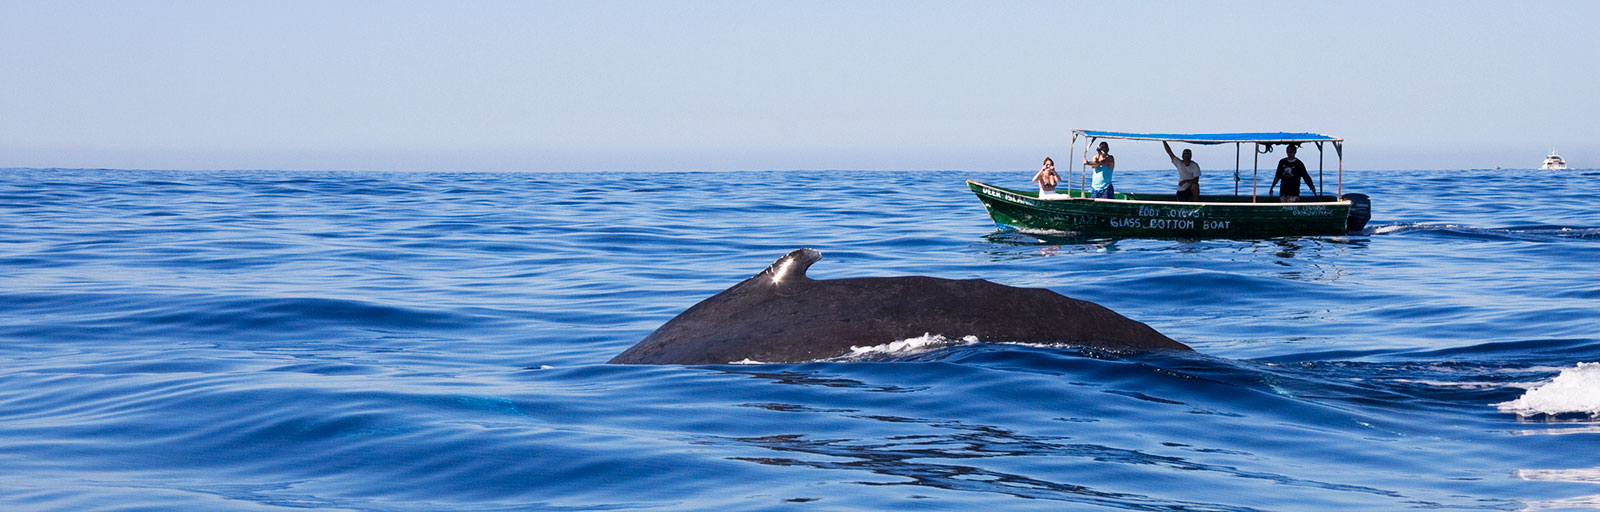 Whale Watching & Yoga Retreat in Mexico: Humpback Whale in Cabo Bay